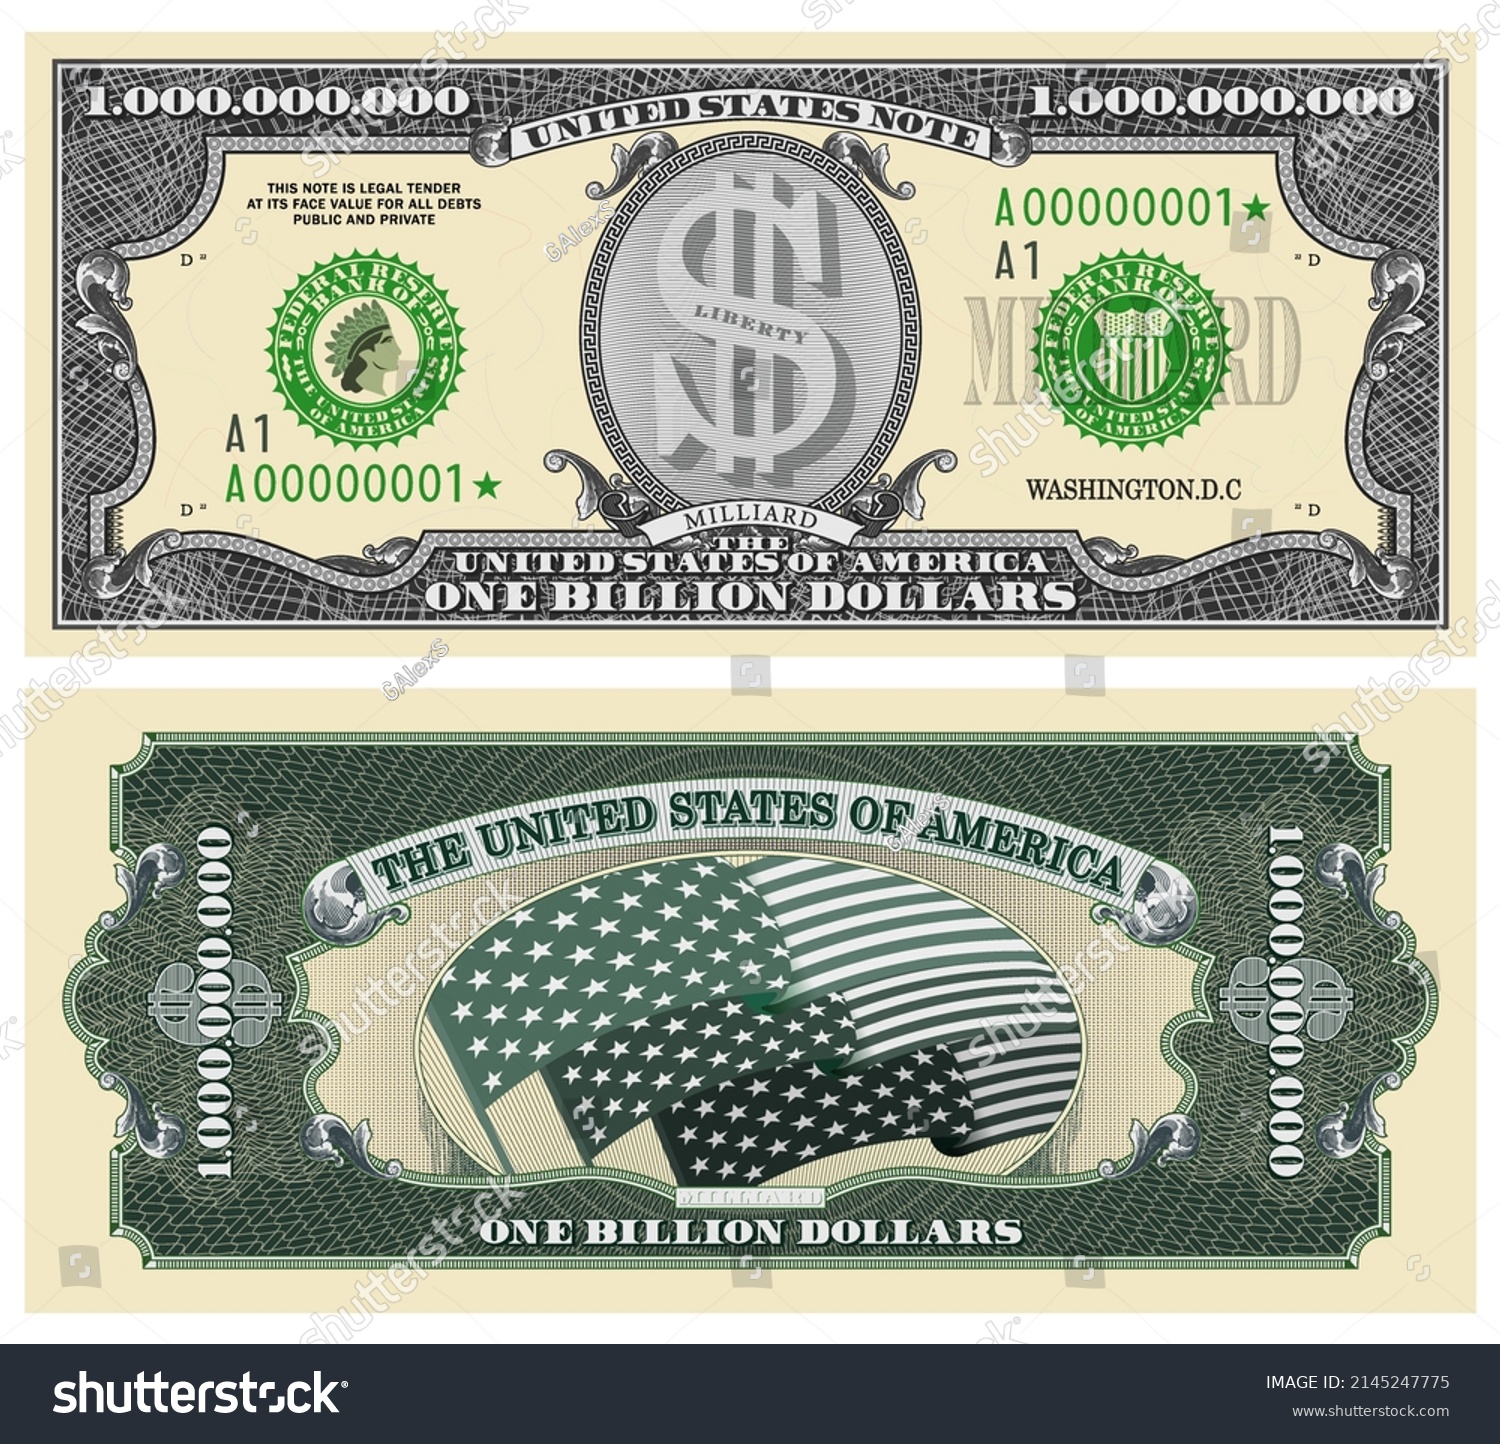 SVG of Obverse and reverse of a fictitious one billion dollar paper note. Vintage US money with security features, guilloche mesh and seals svg